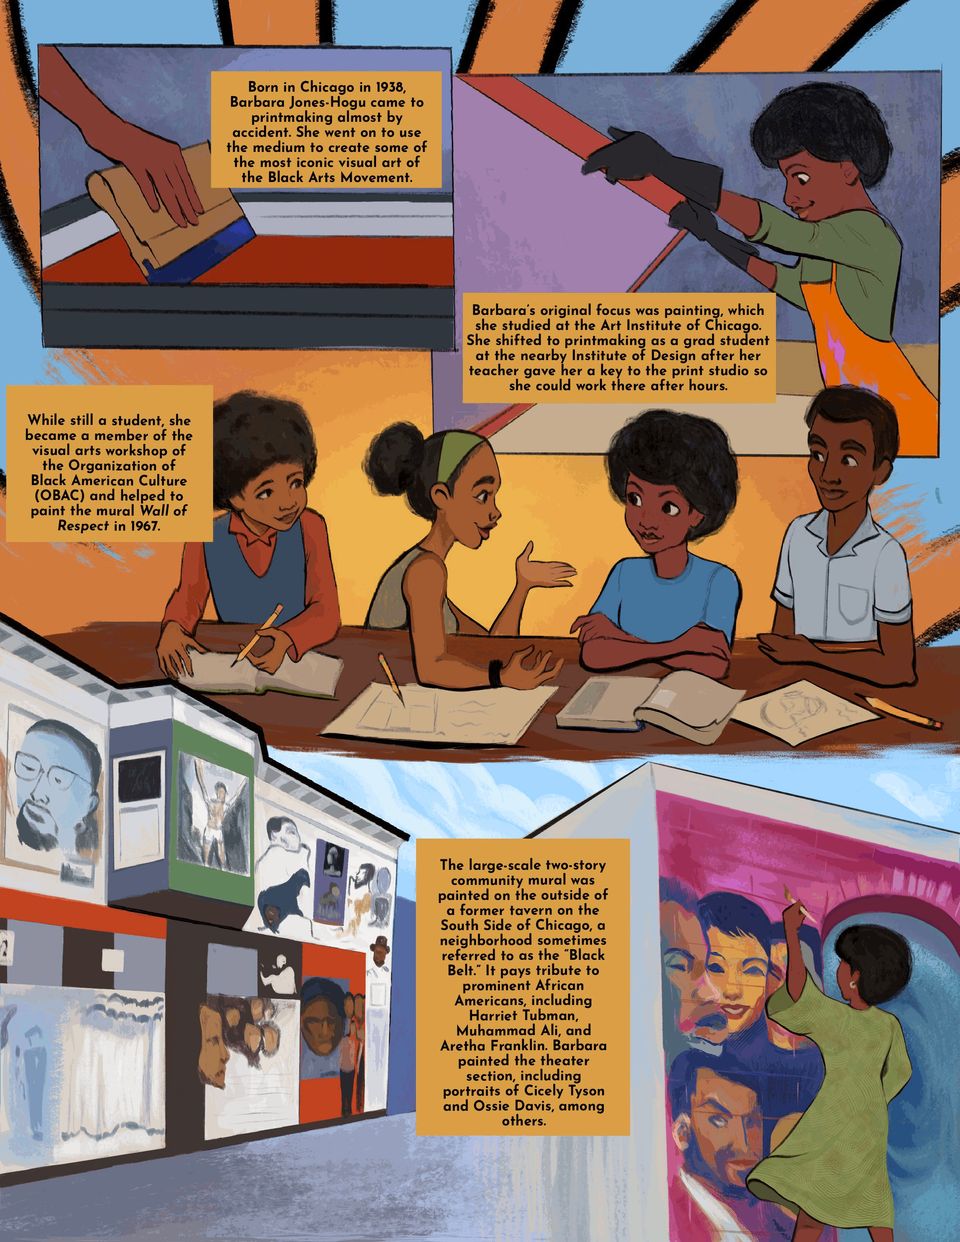 Illustrations and descriptions of Barbara printmaking, meeting with OBAC members, and painting the Wall of Respect in Chicago.